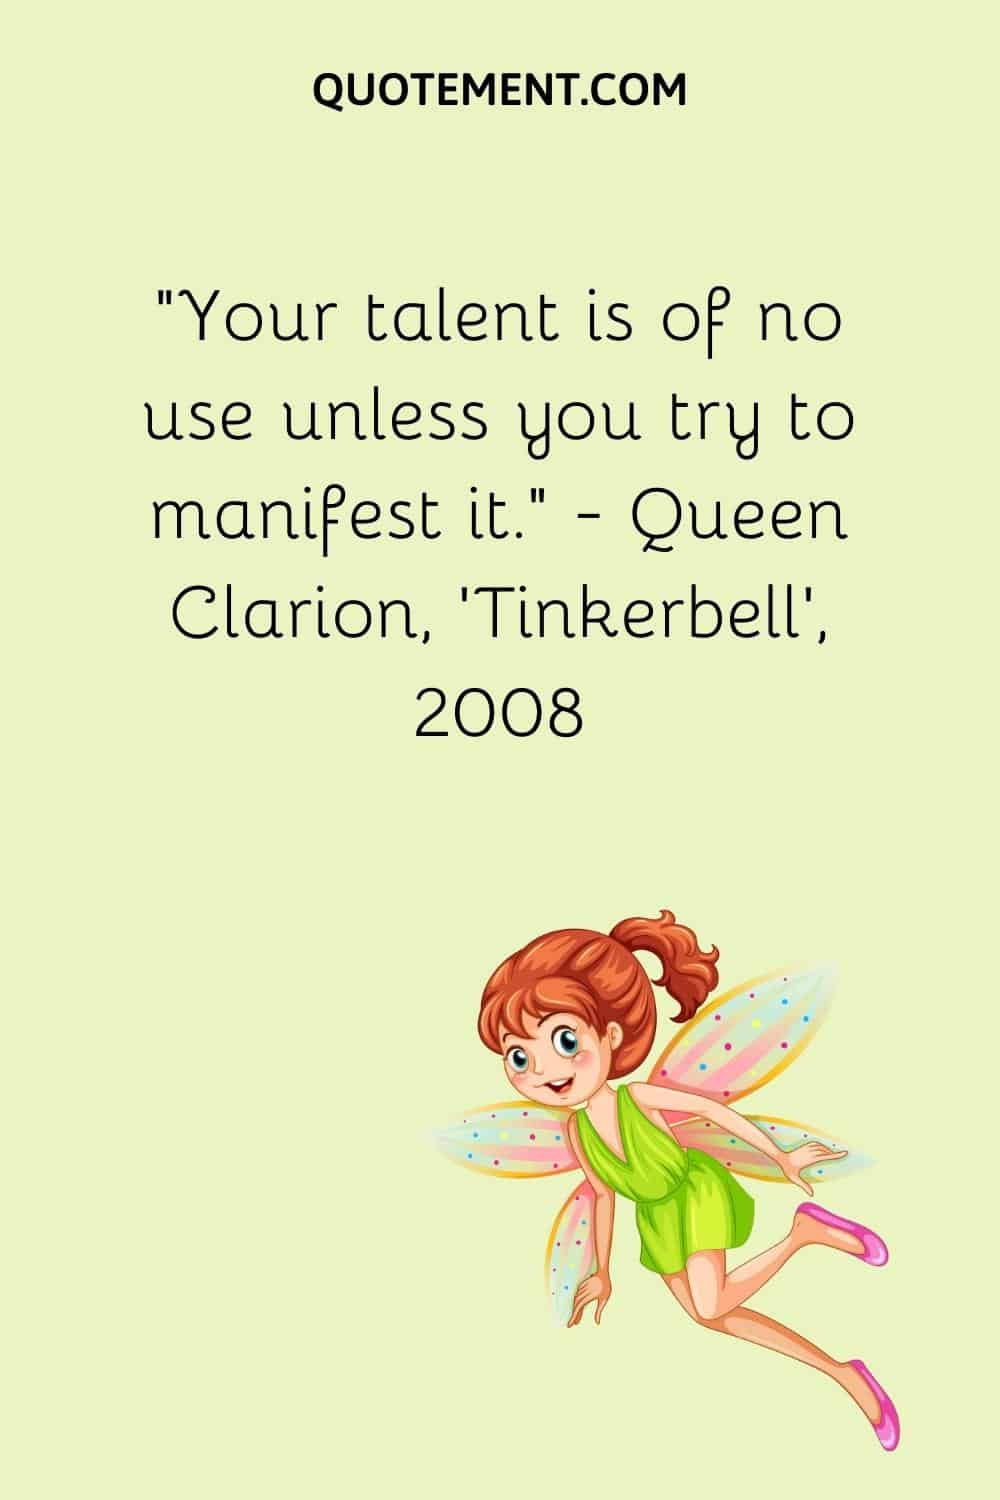 Your talent is of no use unless you try to manifest it.